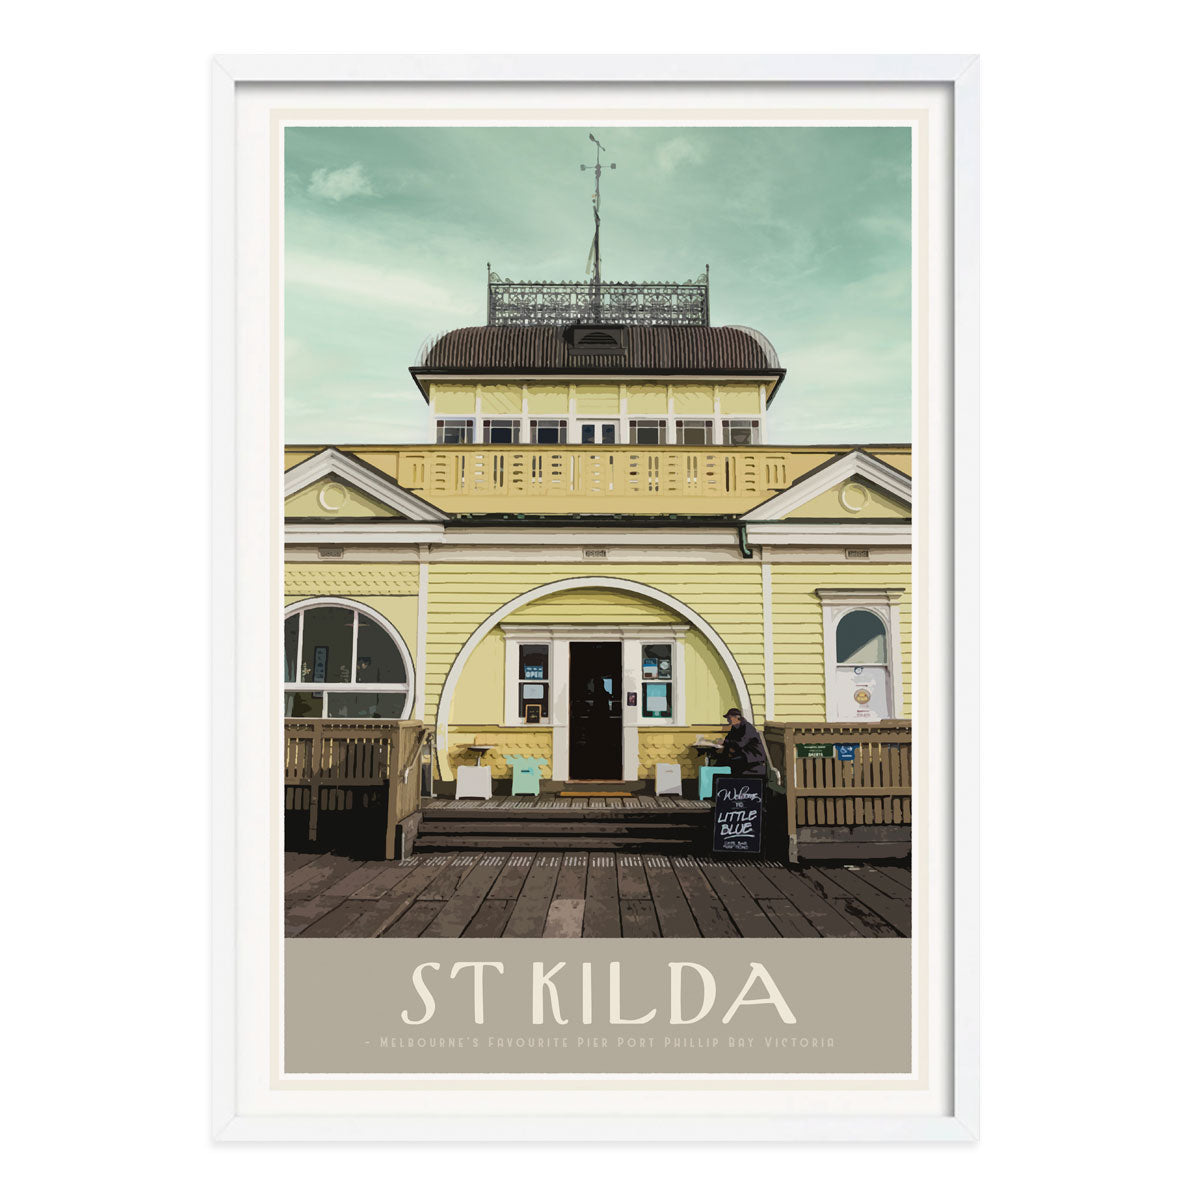 Melbourne poster, st kilda, retro vintage print in white frame from Places We Luv